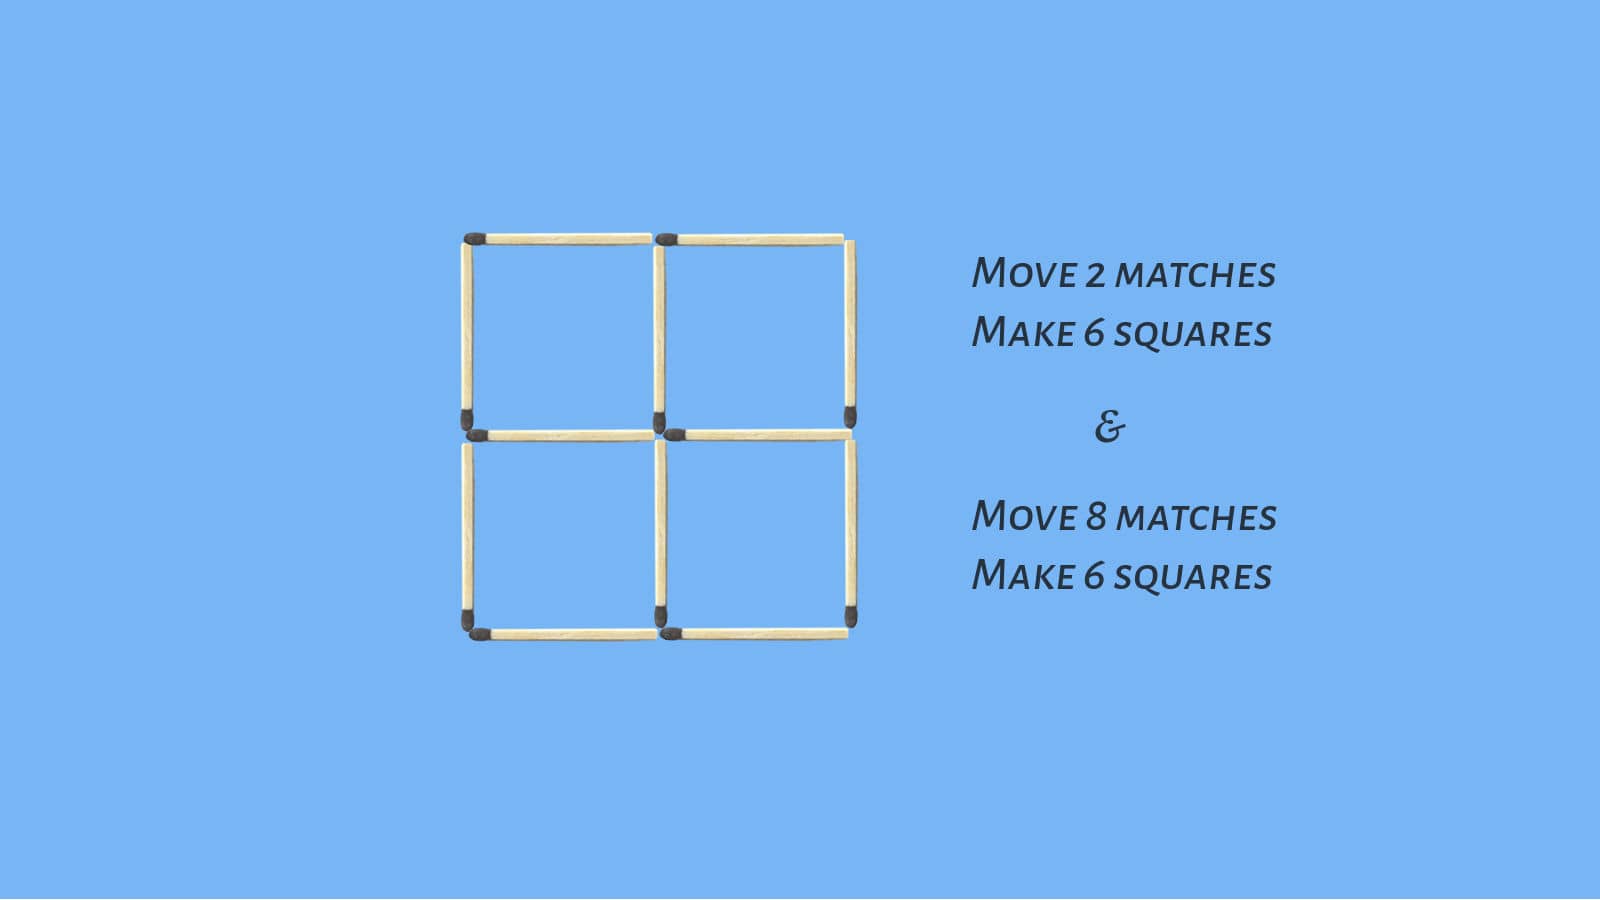 Move 2 matches to make 7 squares and move 8 to make 6 squares